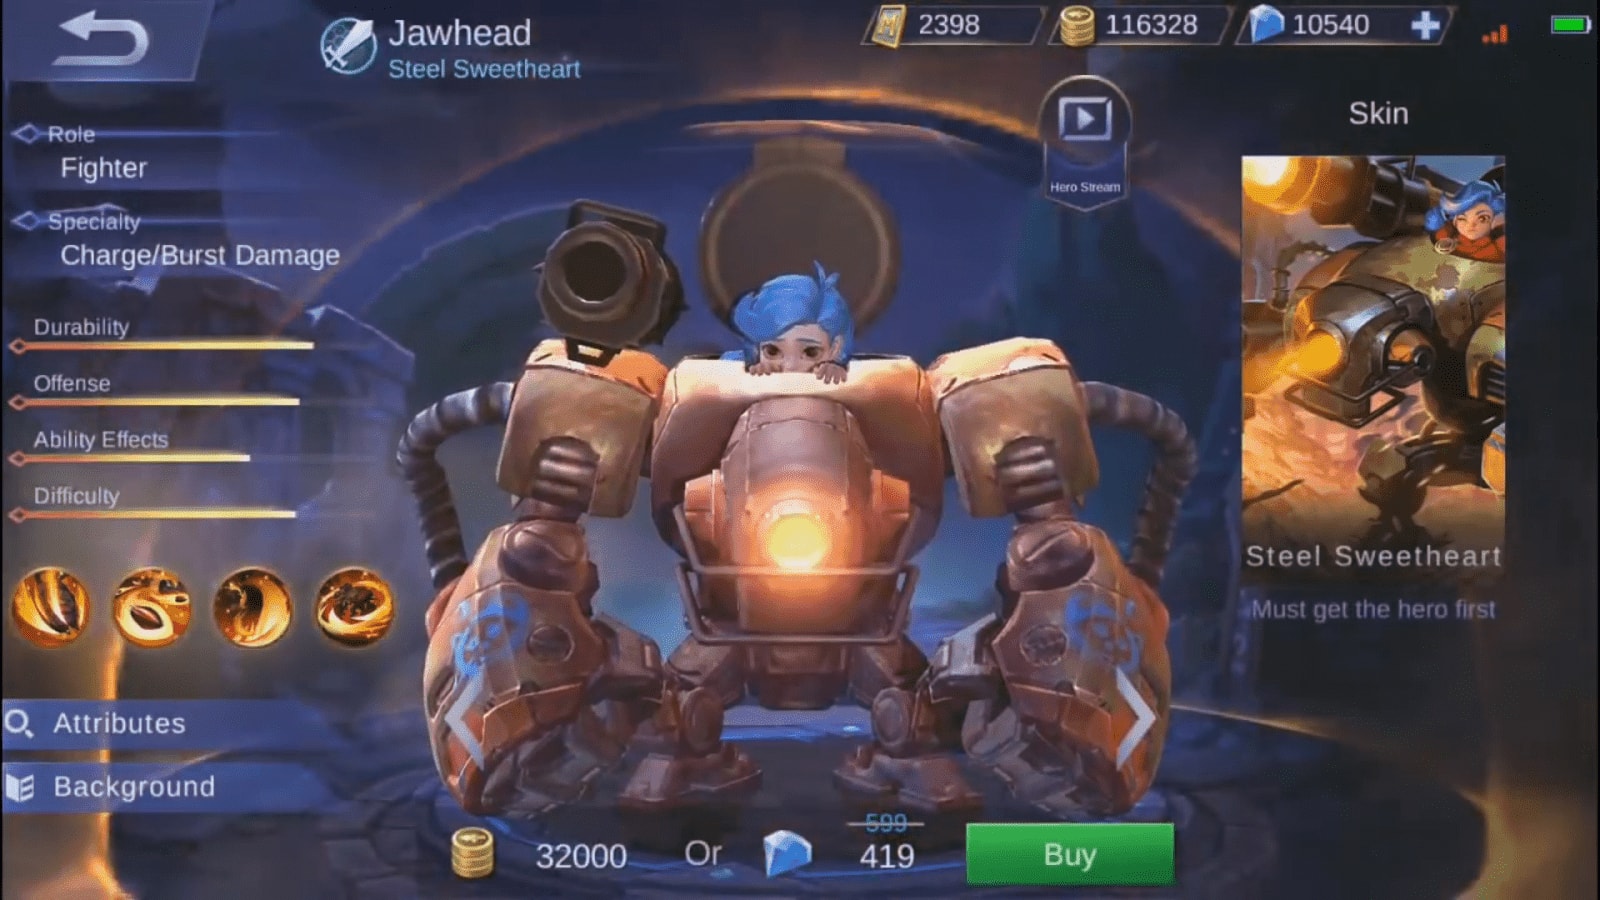 Wallpaper Jawhead Mobile Legend Topbackground